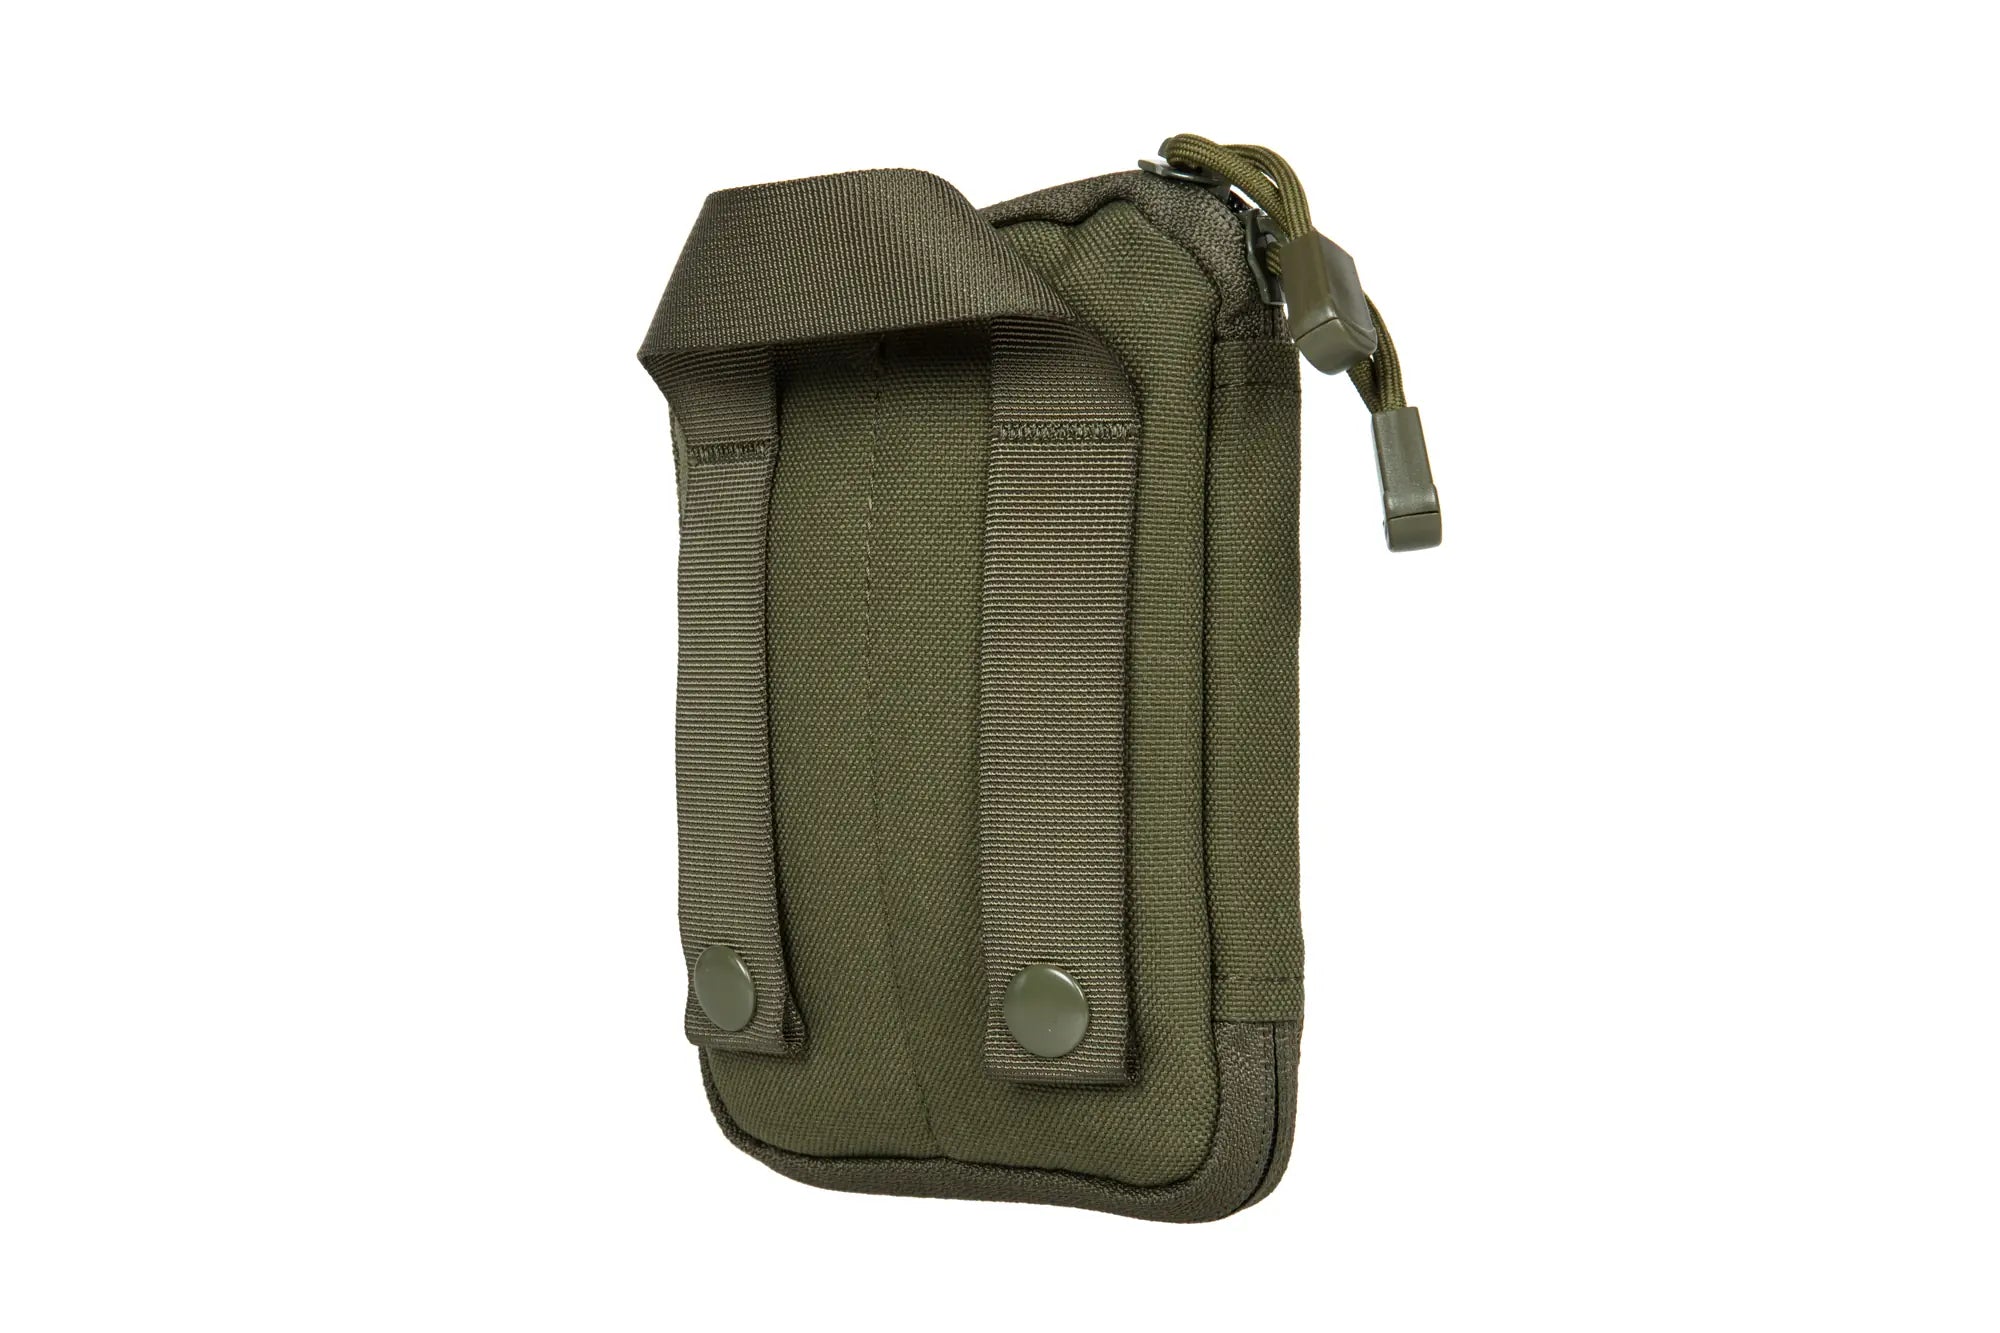 Admin pouch - Olive-3